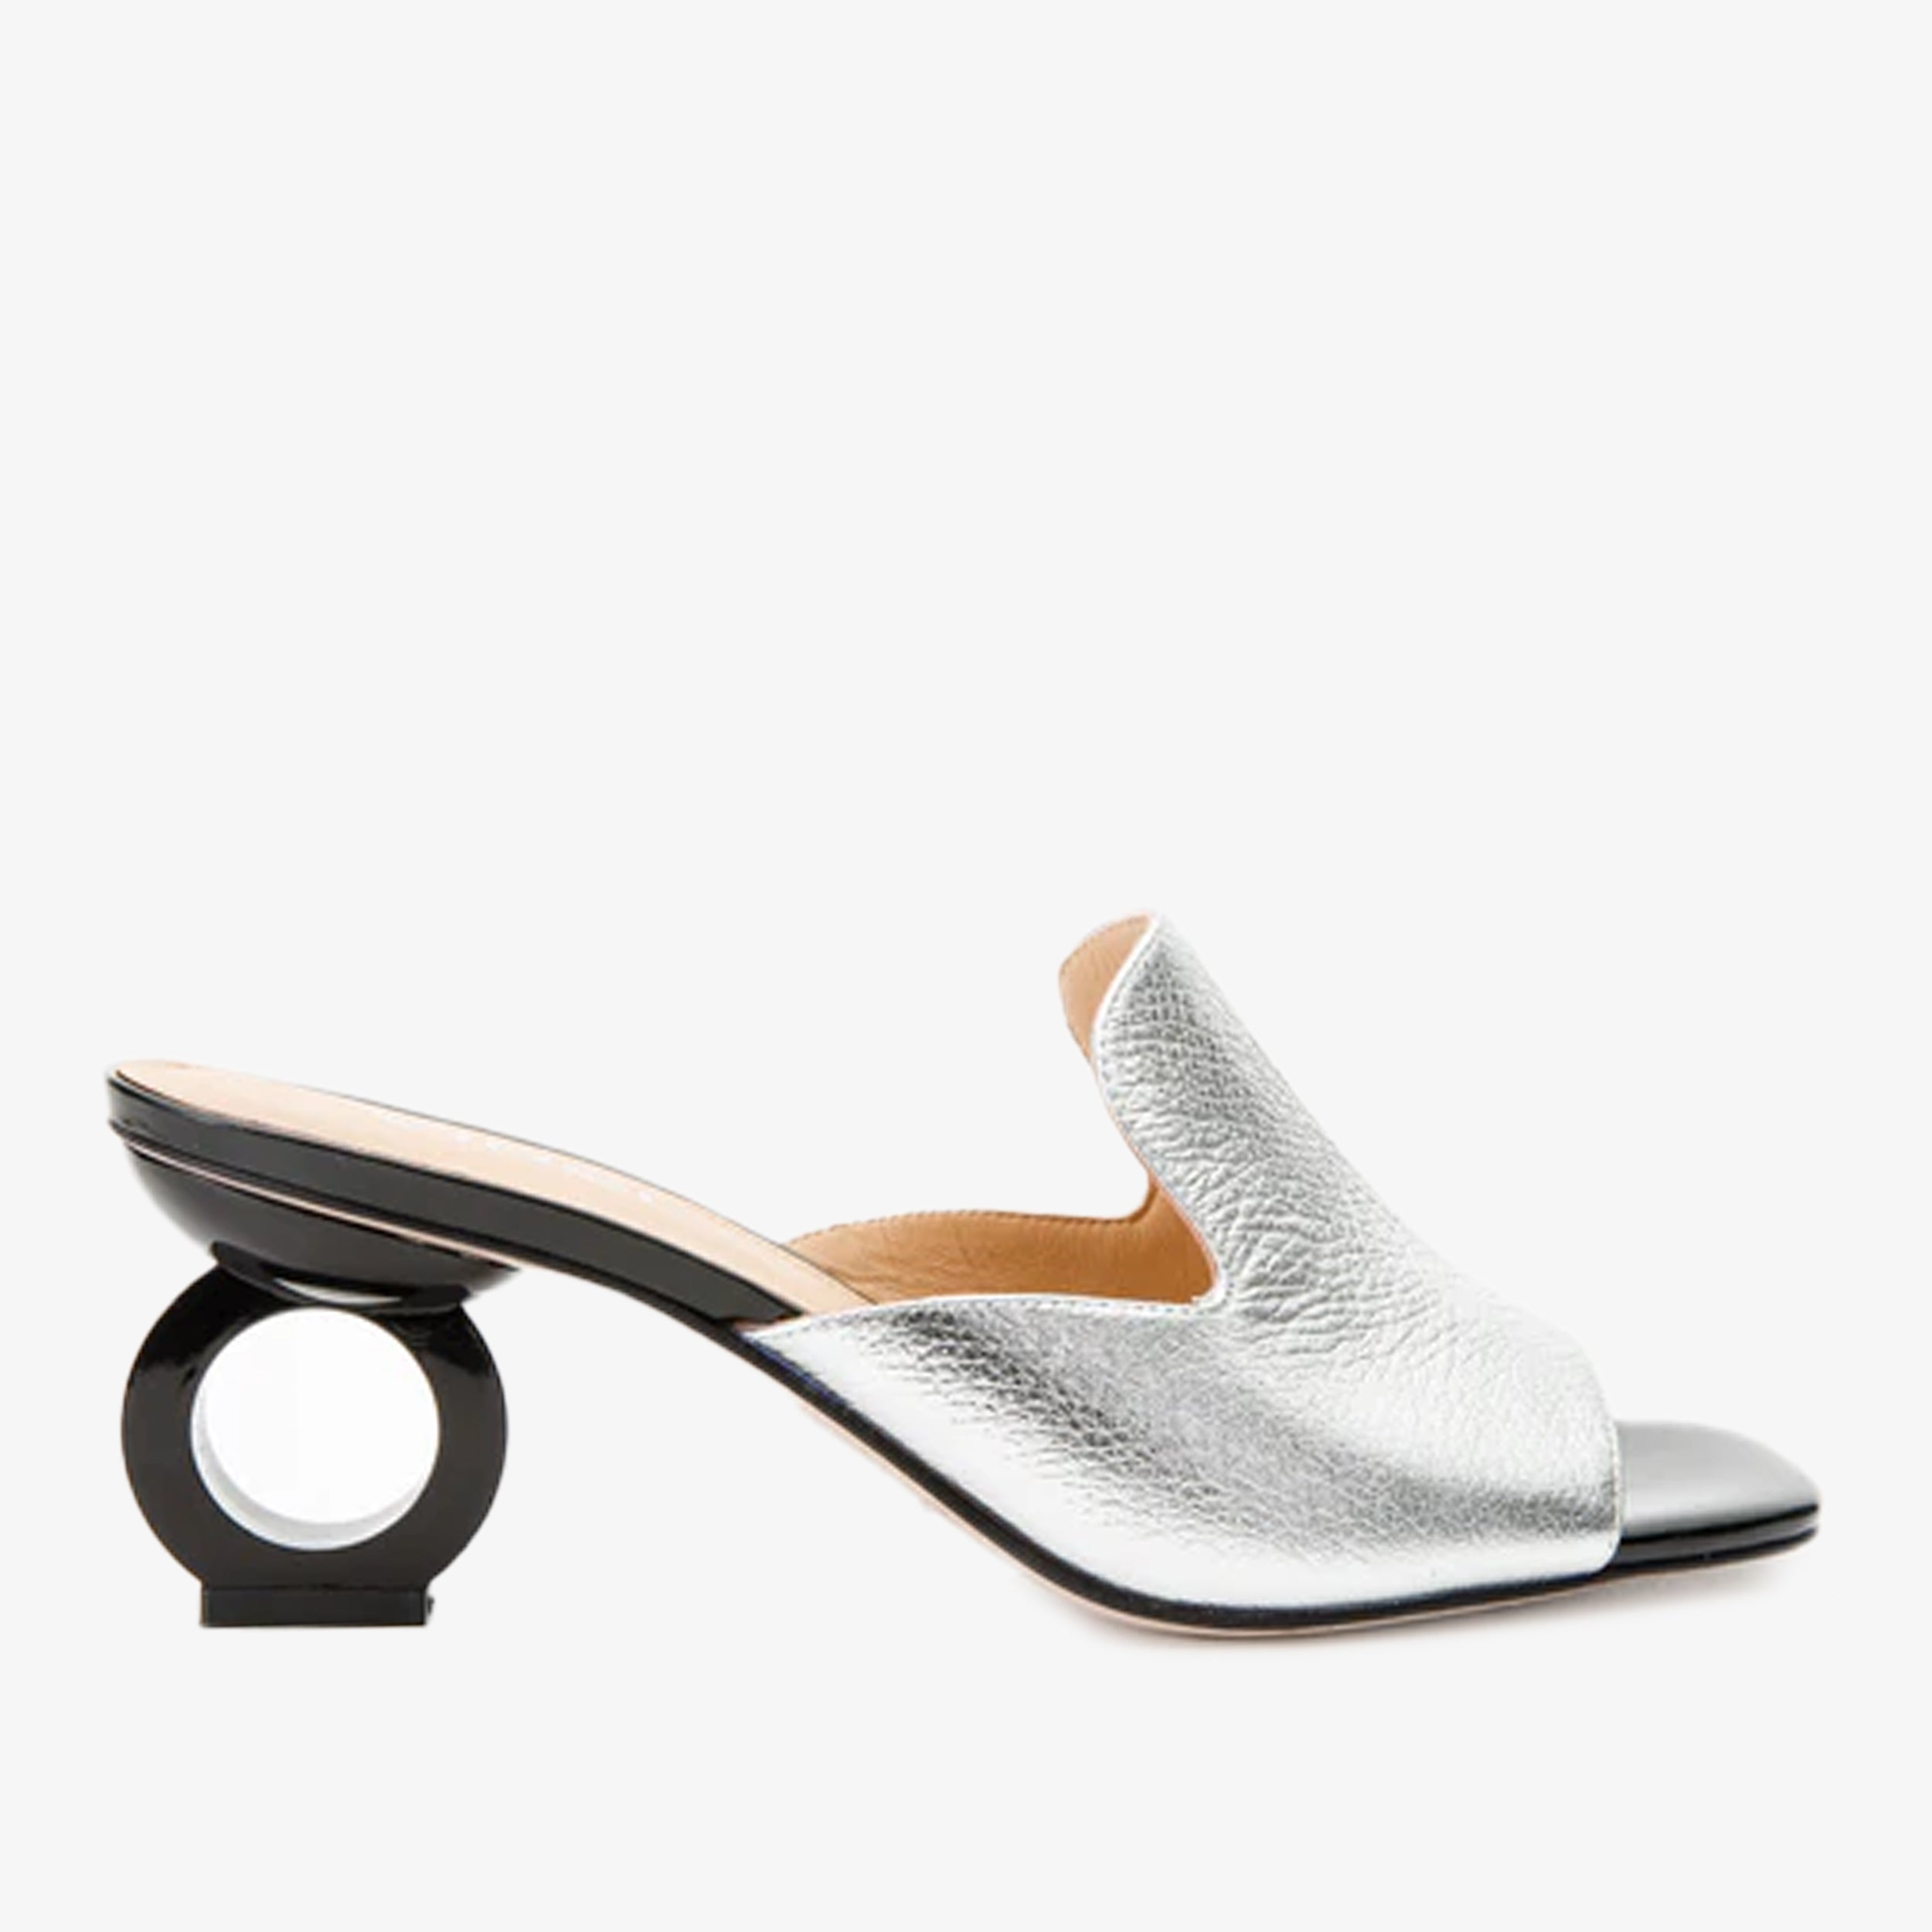 The Tory Silver Leather Women Sandal